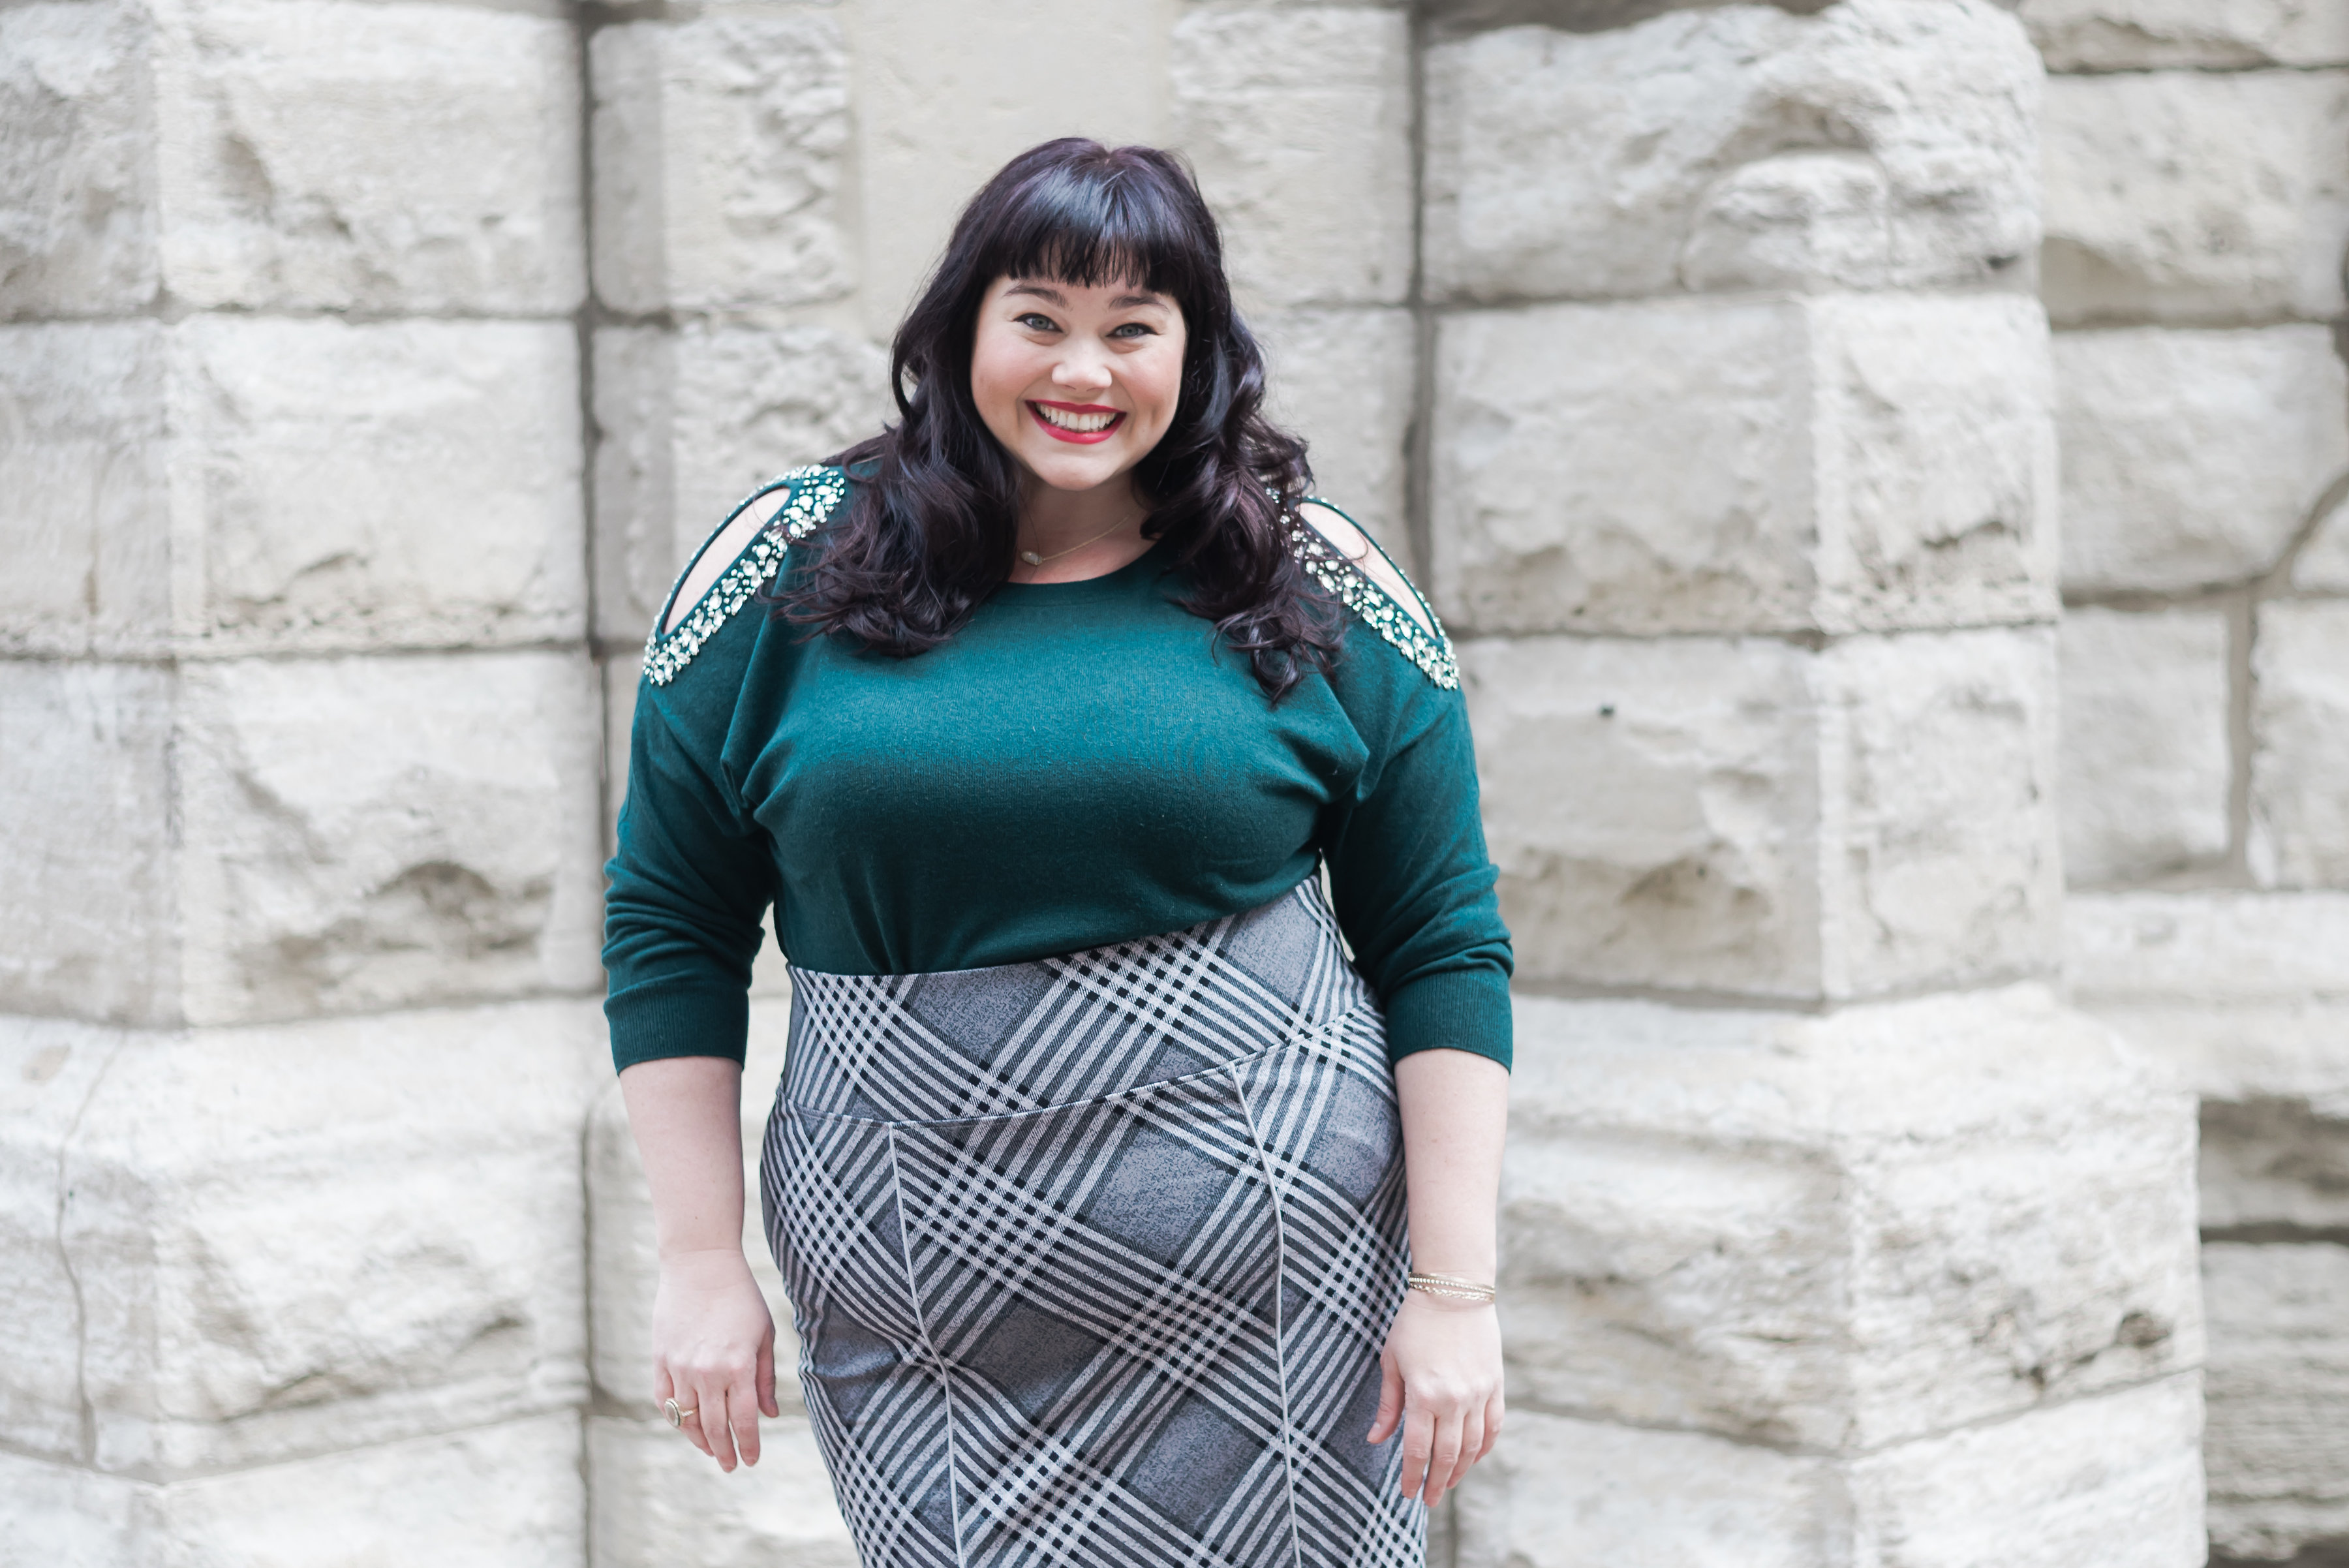 Gwynnie Bee, What to Wear This Thanksgiving, Thanksgiving, Holiday Style, Plus Size Holiday, Plus Size Style, Plus Size Fashion, Style Plus Curves, Chicago Blogger, Chicago Plus Size Blogger, Plus Size Blogger, Amber McCulloch